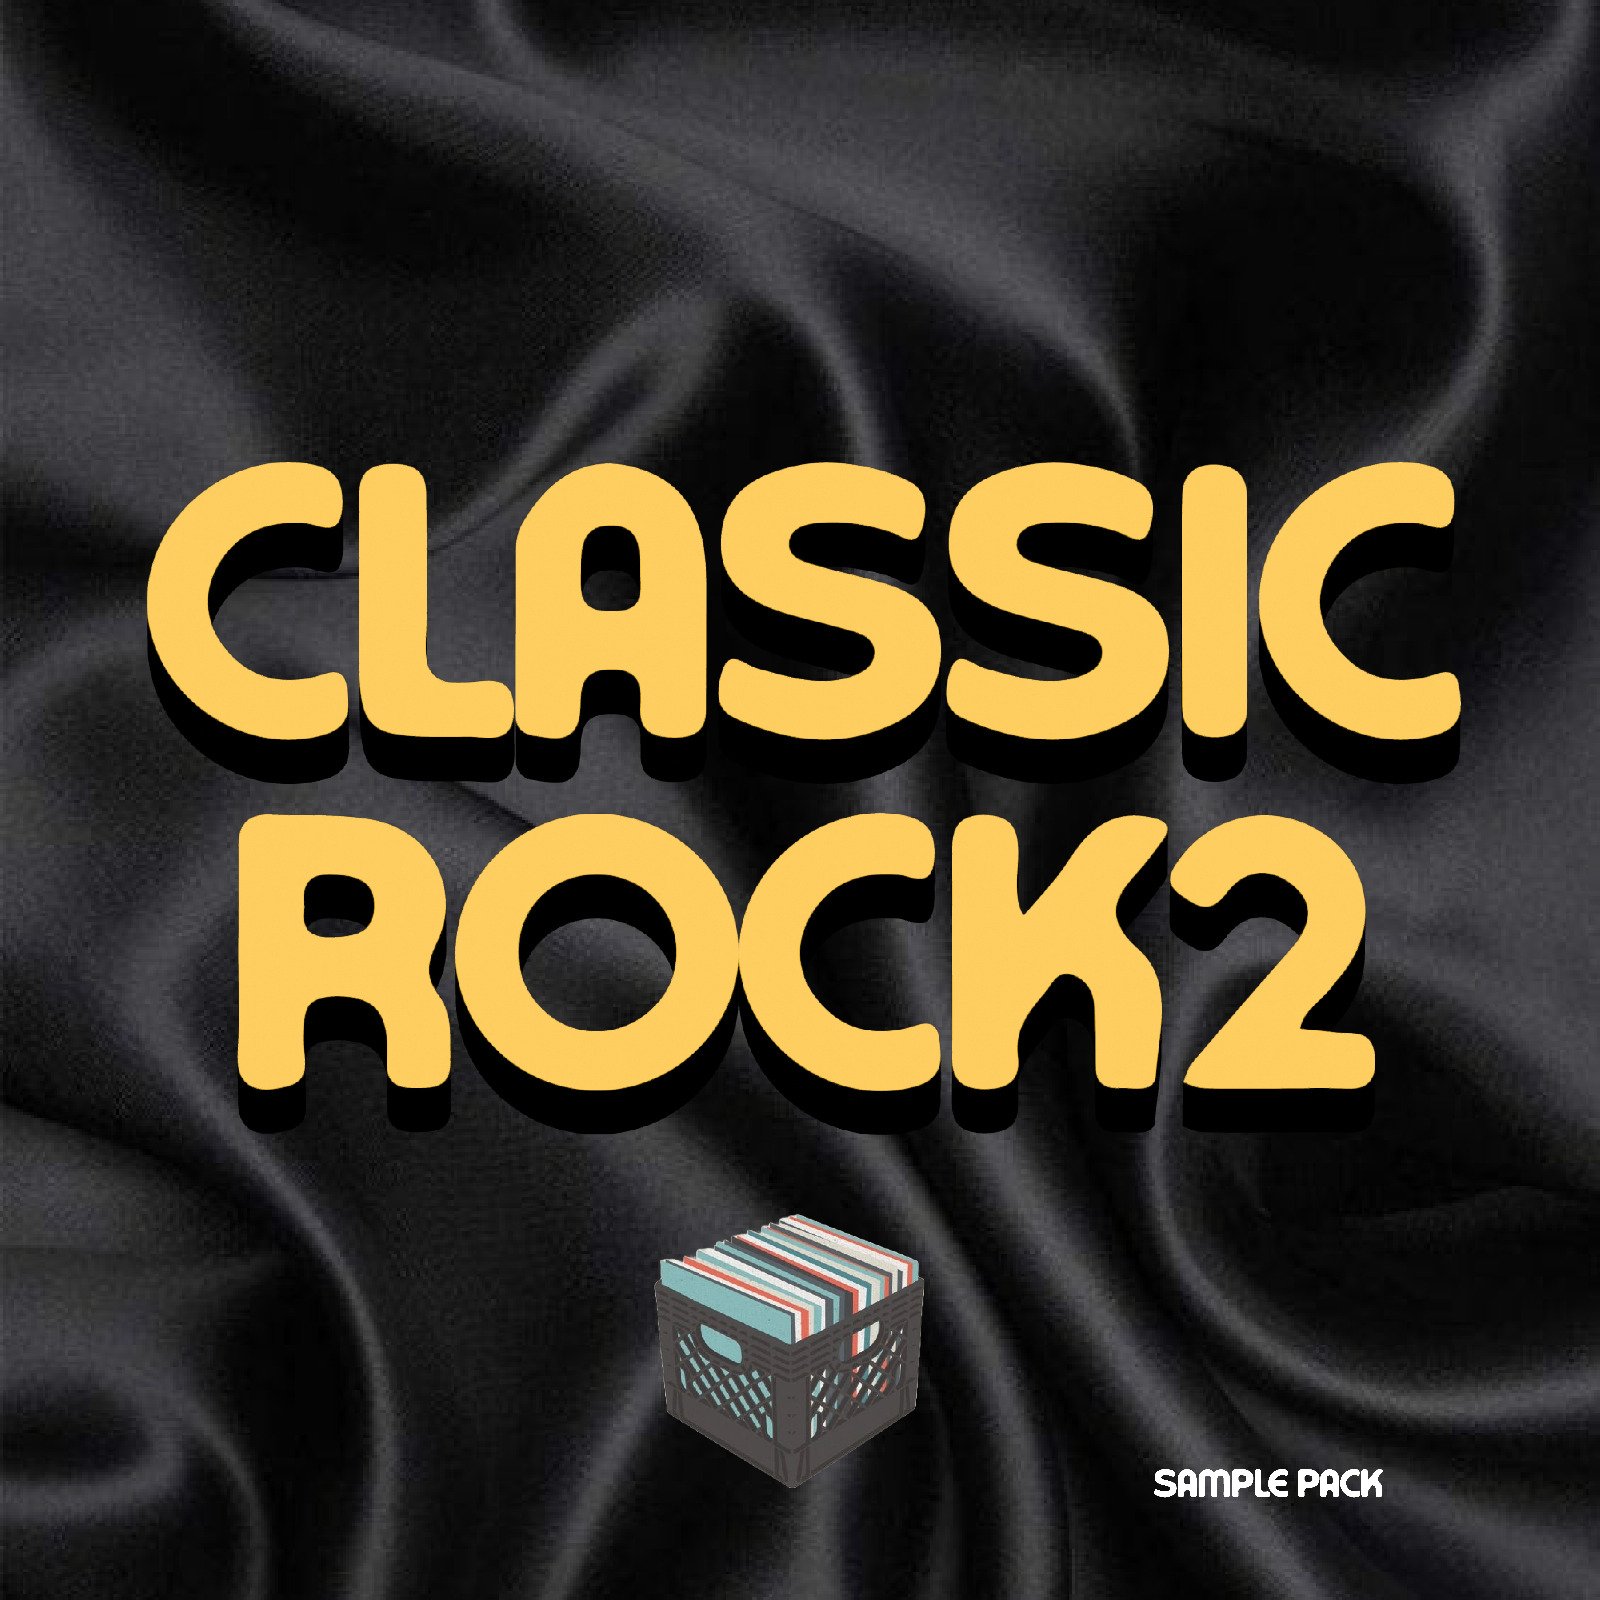 Classic Rock Vol. 1 | 2000s+ Hits (Usb, Cd, Micro Sd Card) Sample Pack Sounds